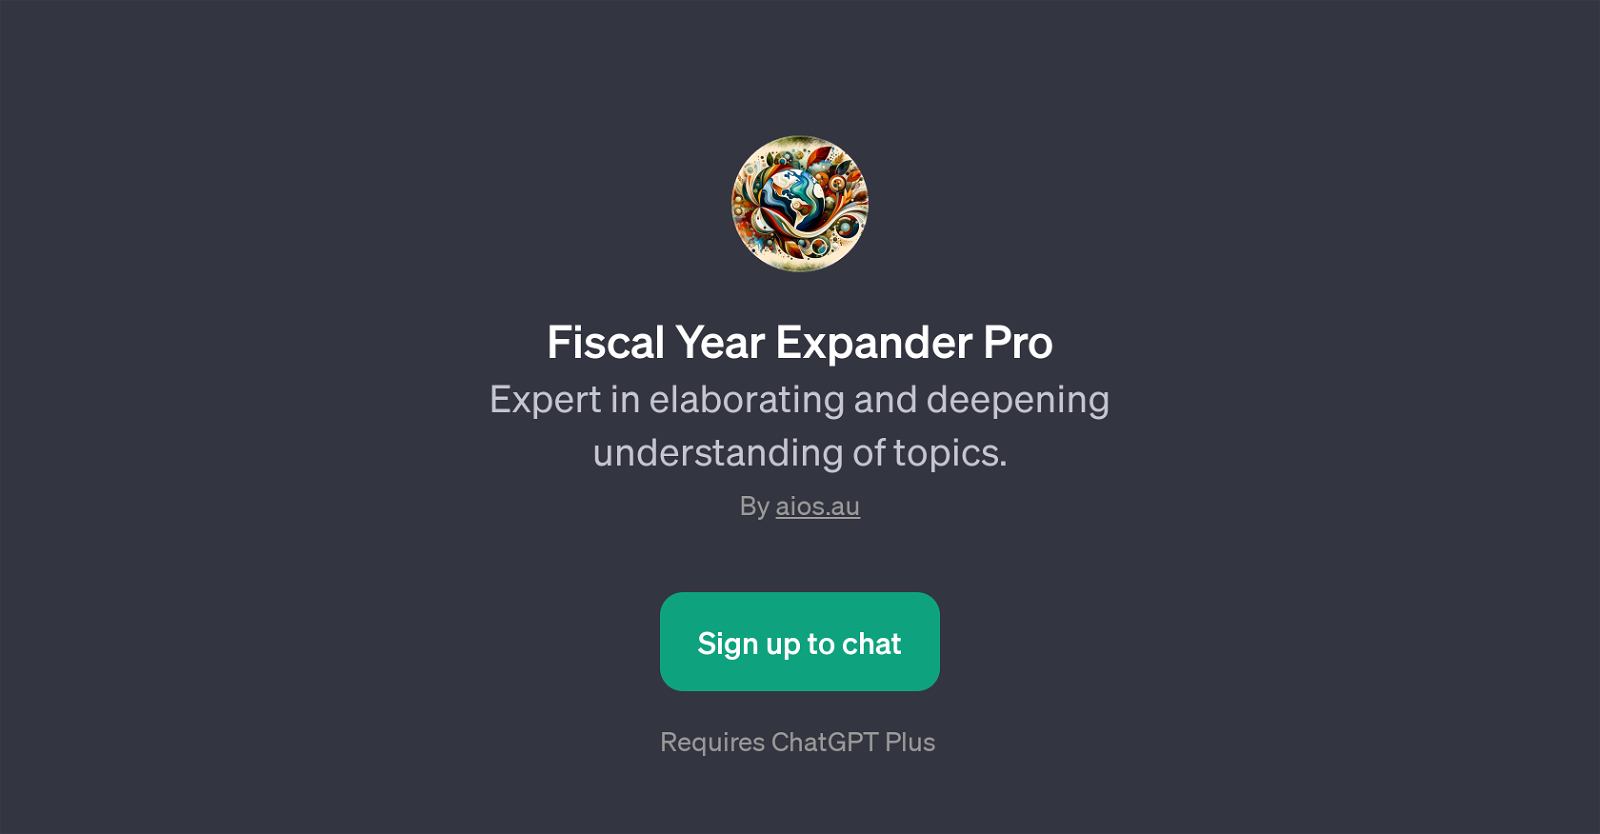 Fiscal Year Expander Pro website